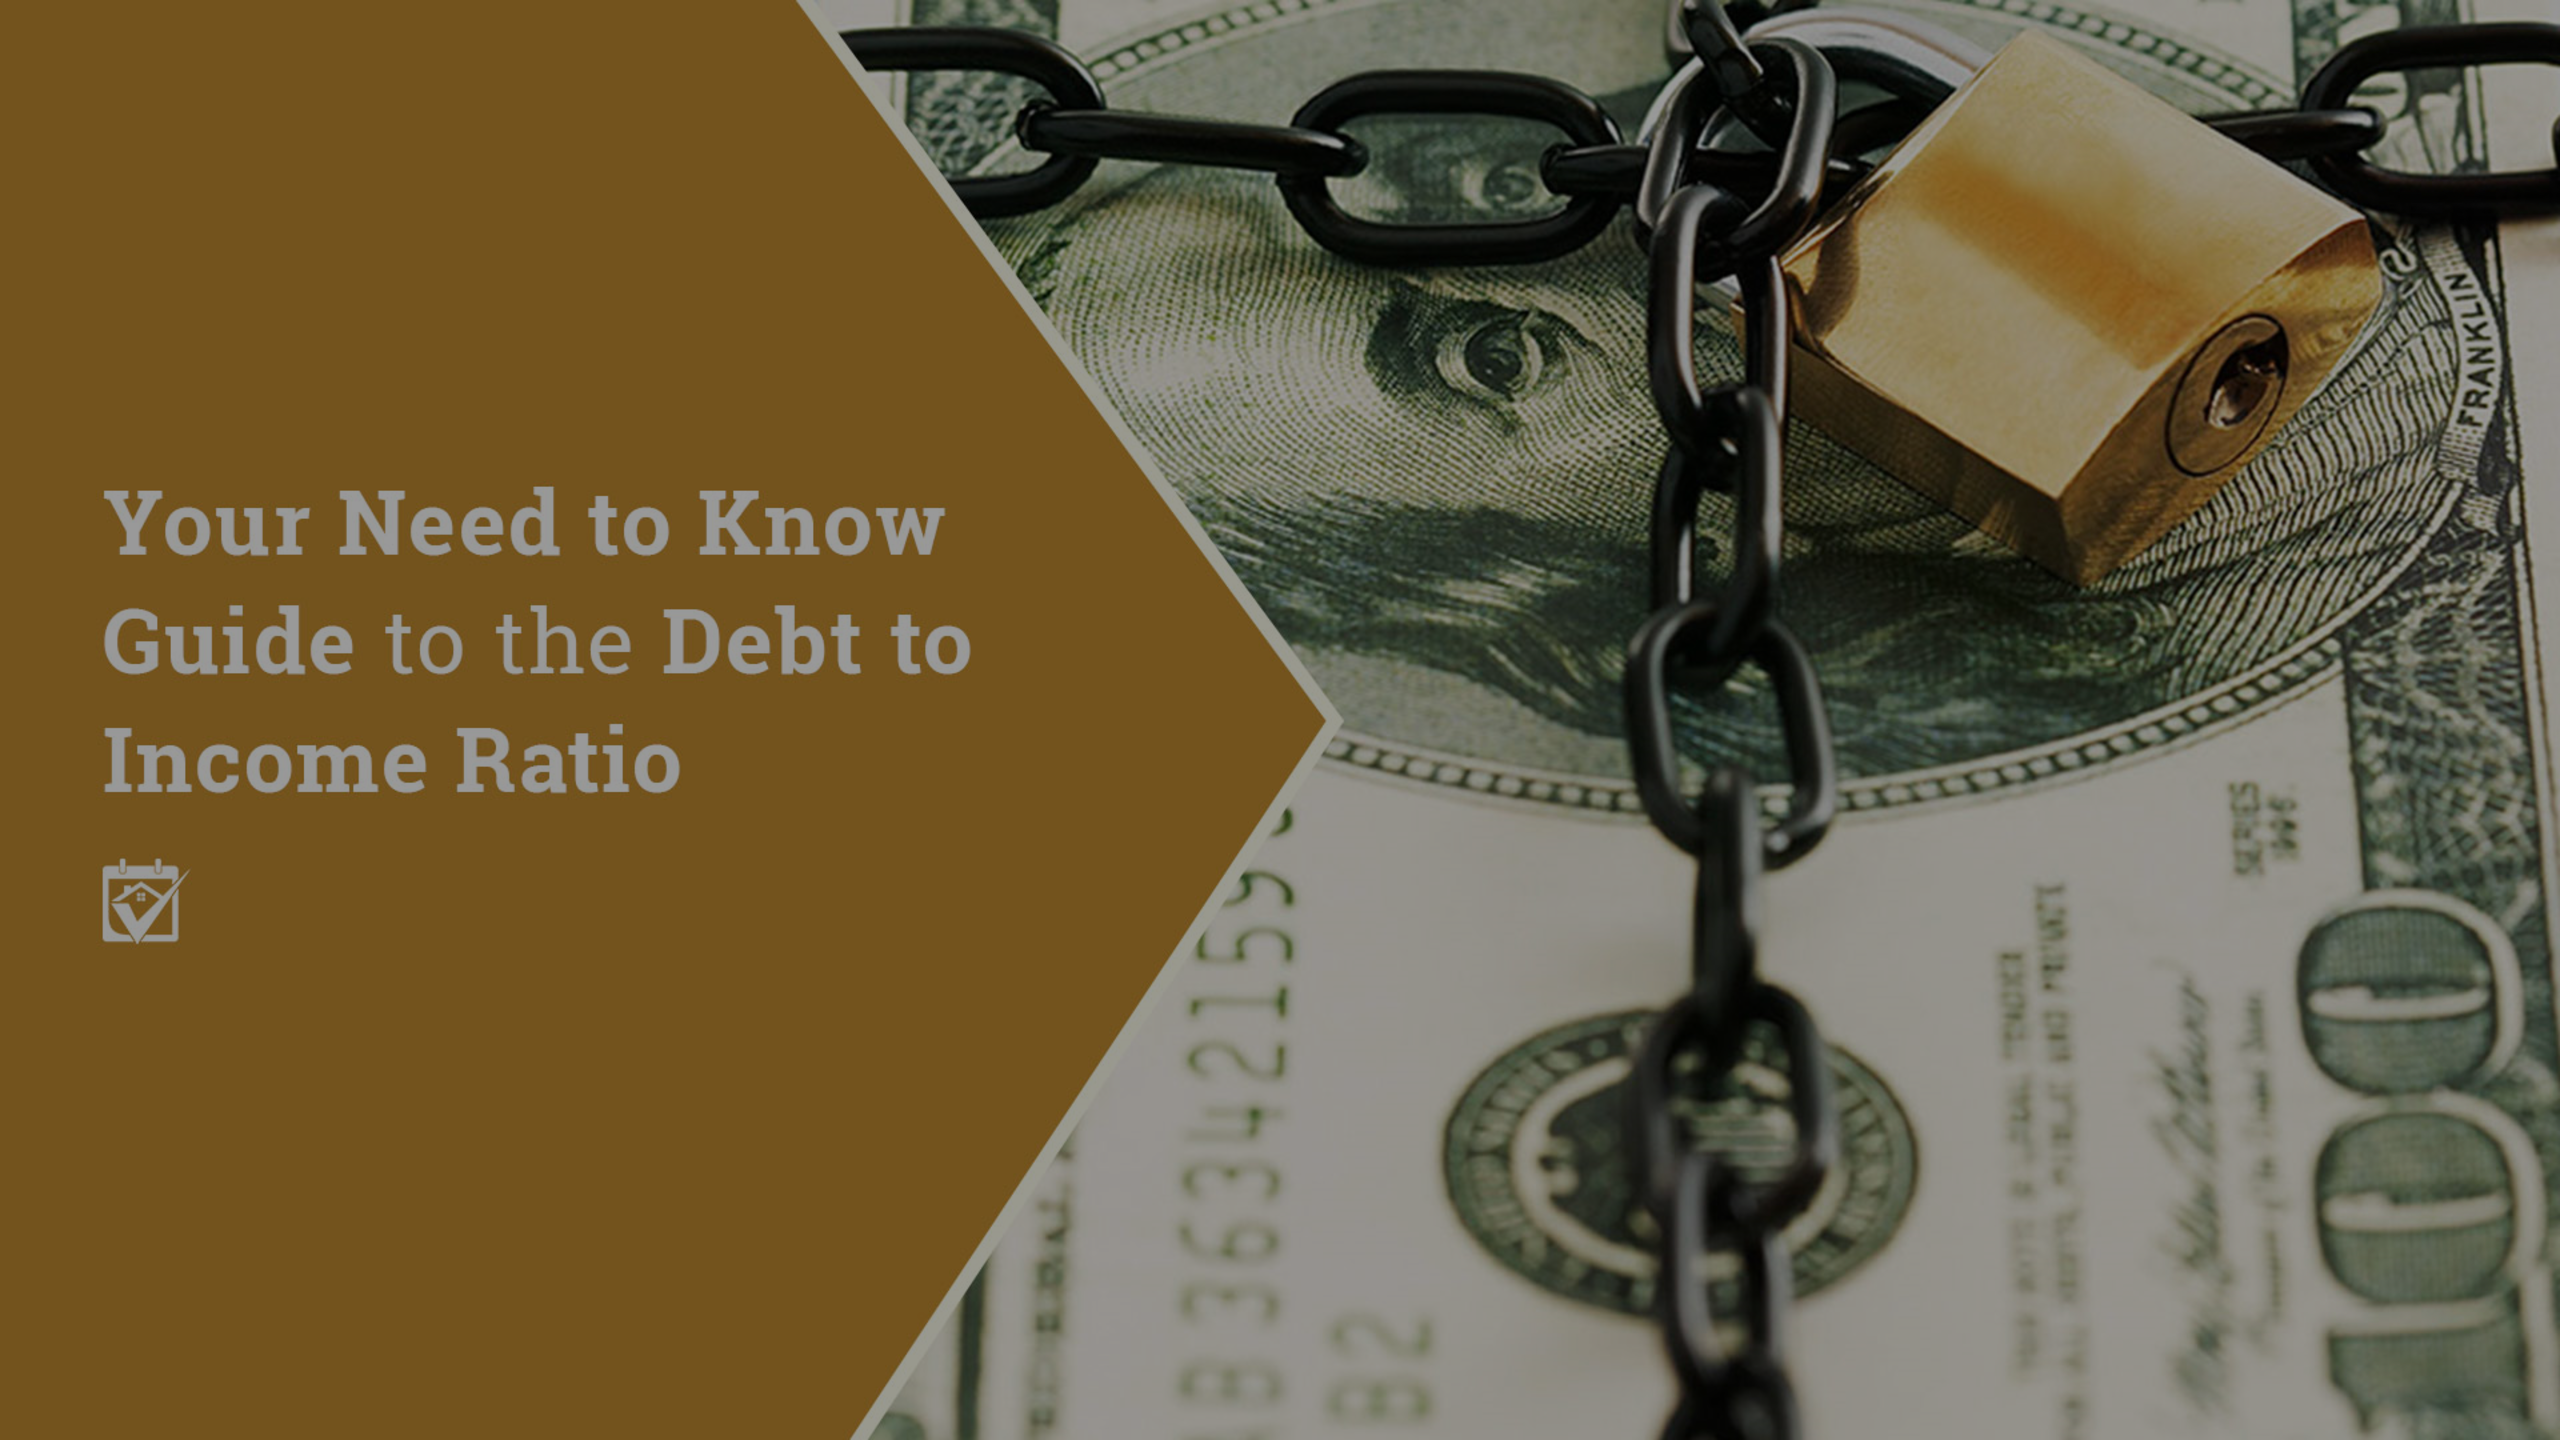 Your Need to Know Guide to the Debt to Income Ratio